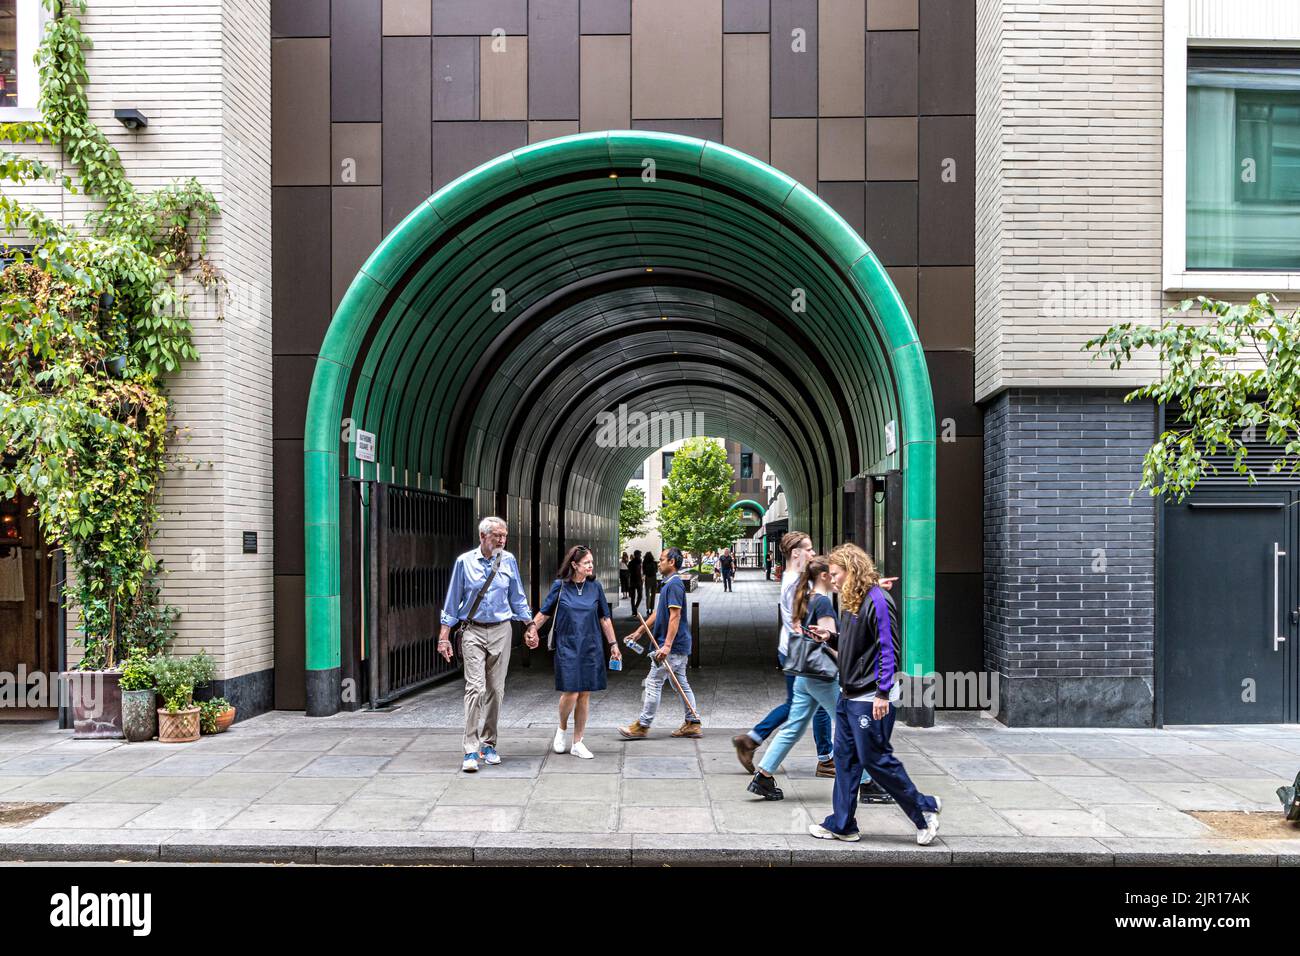 People walking past the turquoise green ceramic tunnel on  Rathbone Square , Fitzrovia, London W1 Stock Photo